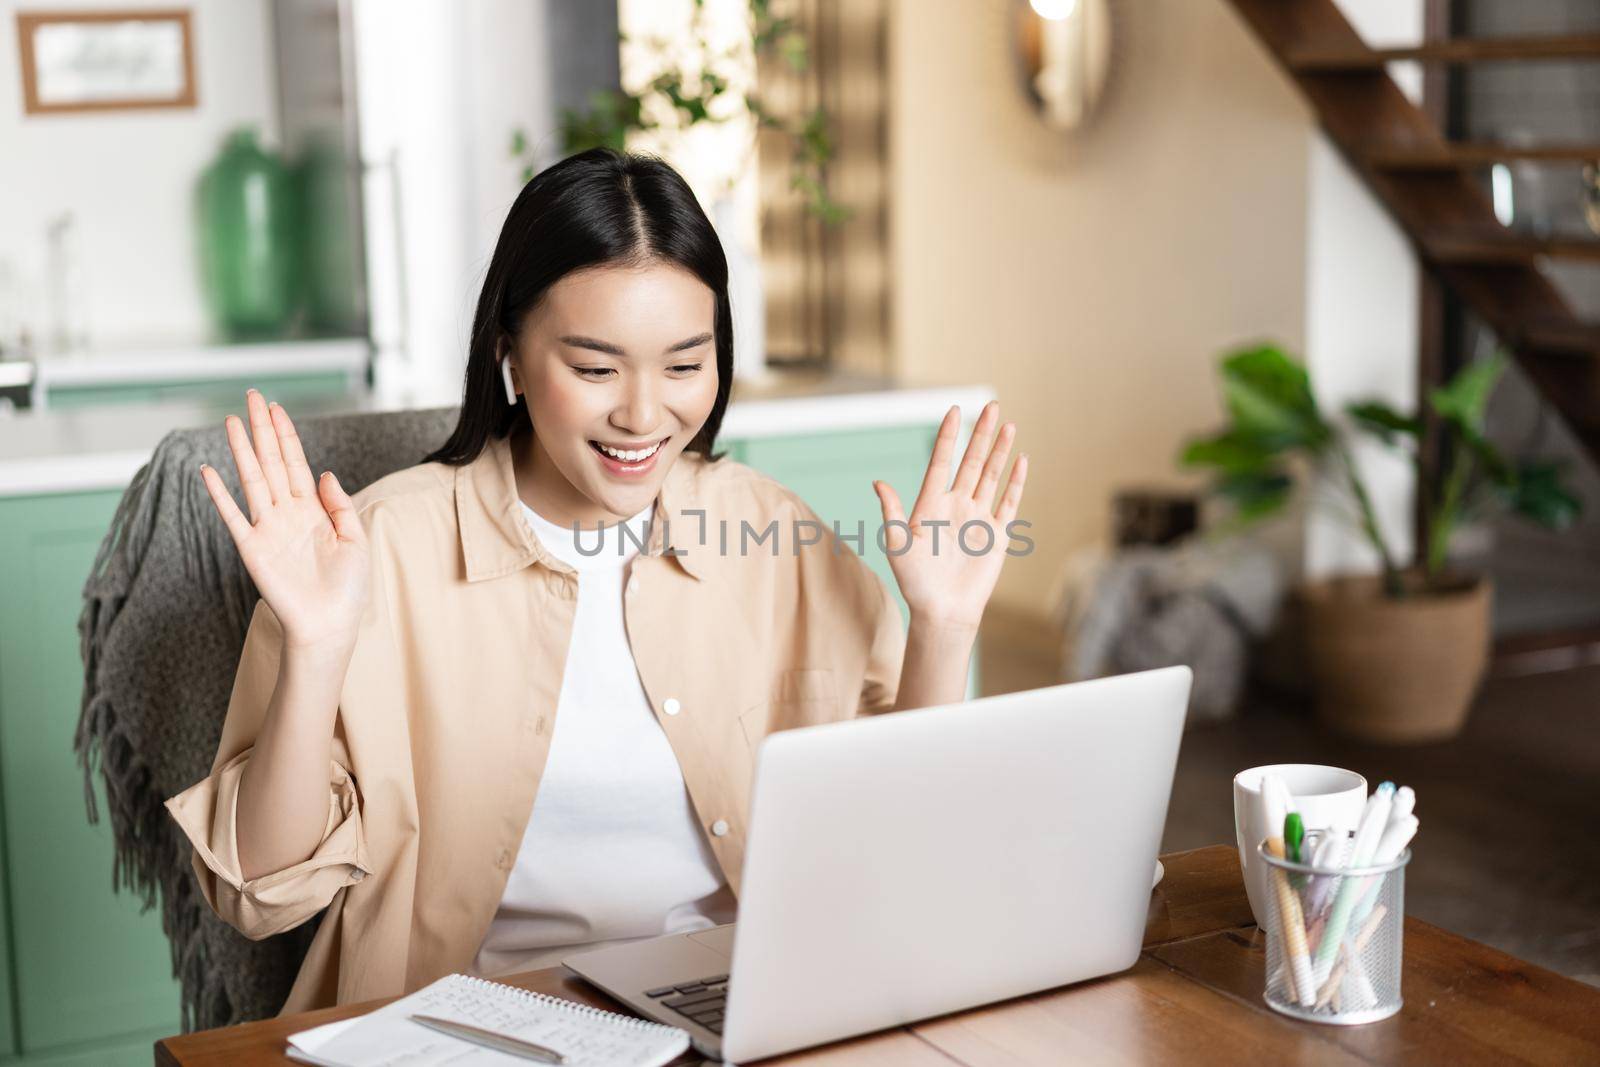 Asian girl on video conference, saying hello, waving hand at laptop camera, working remote from home. Young woman connects to webinar or online classes.